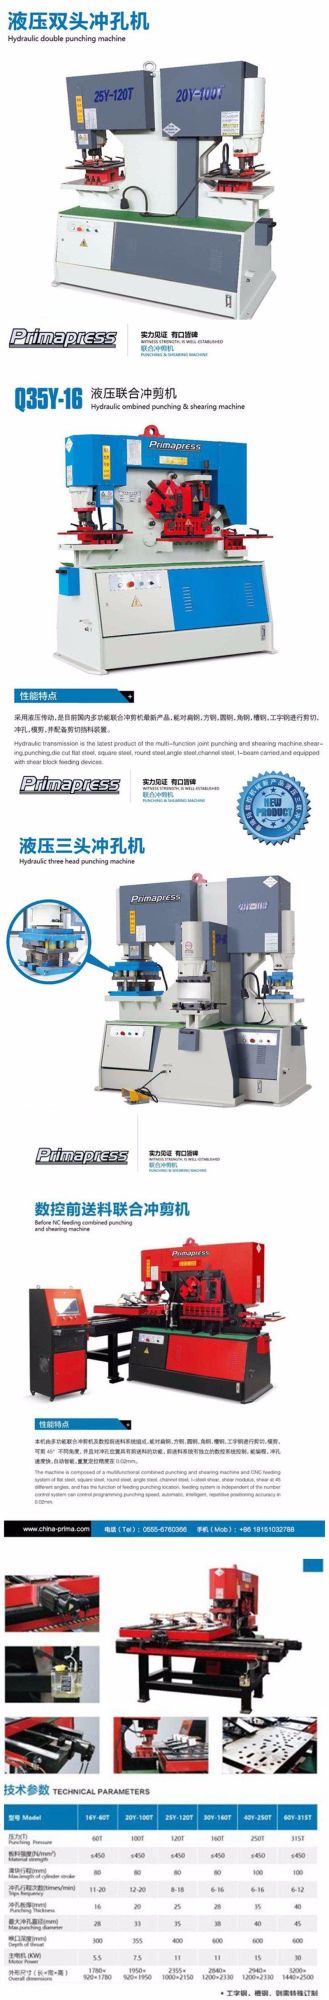 Q35y--16-60t, Q35y Hydraulic Combined Punch and Shear Machine, Steel Working Machine Low Price